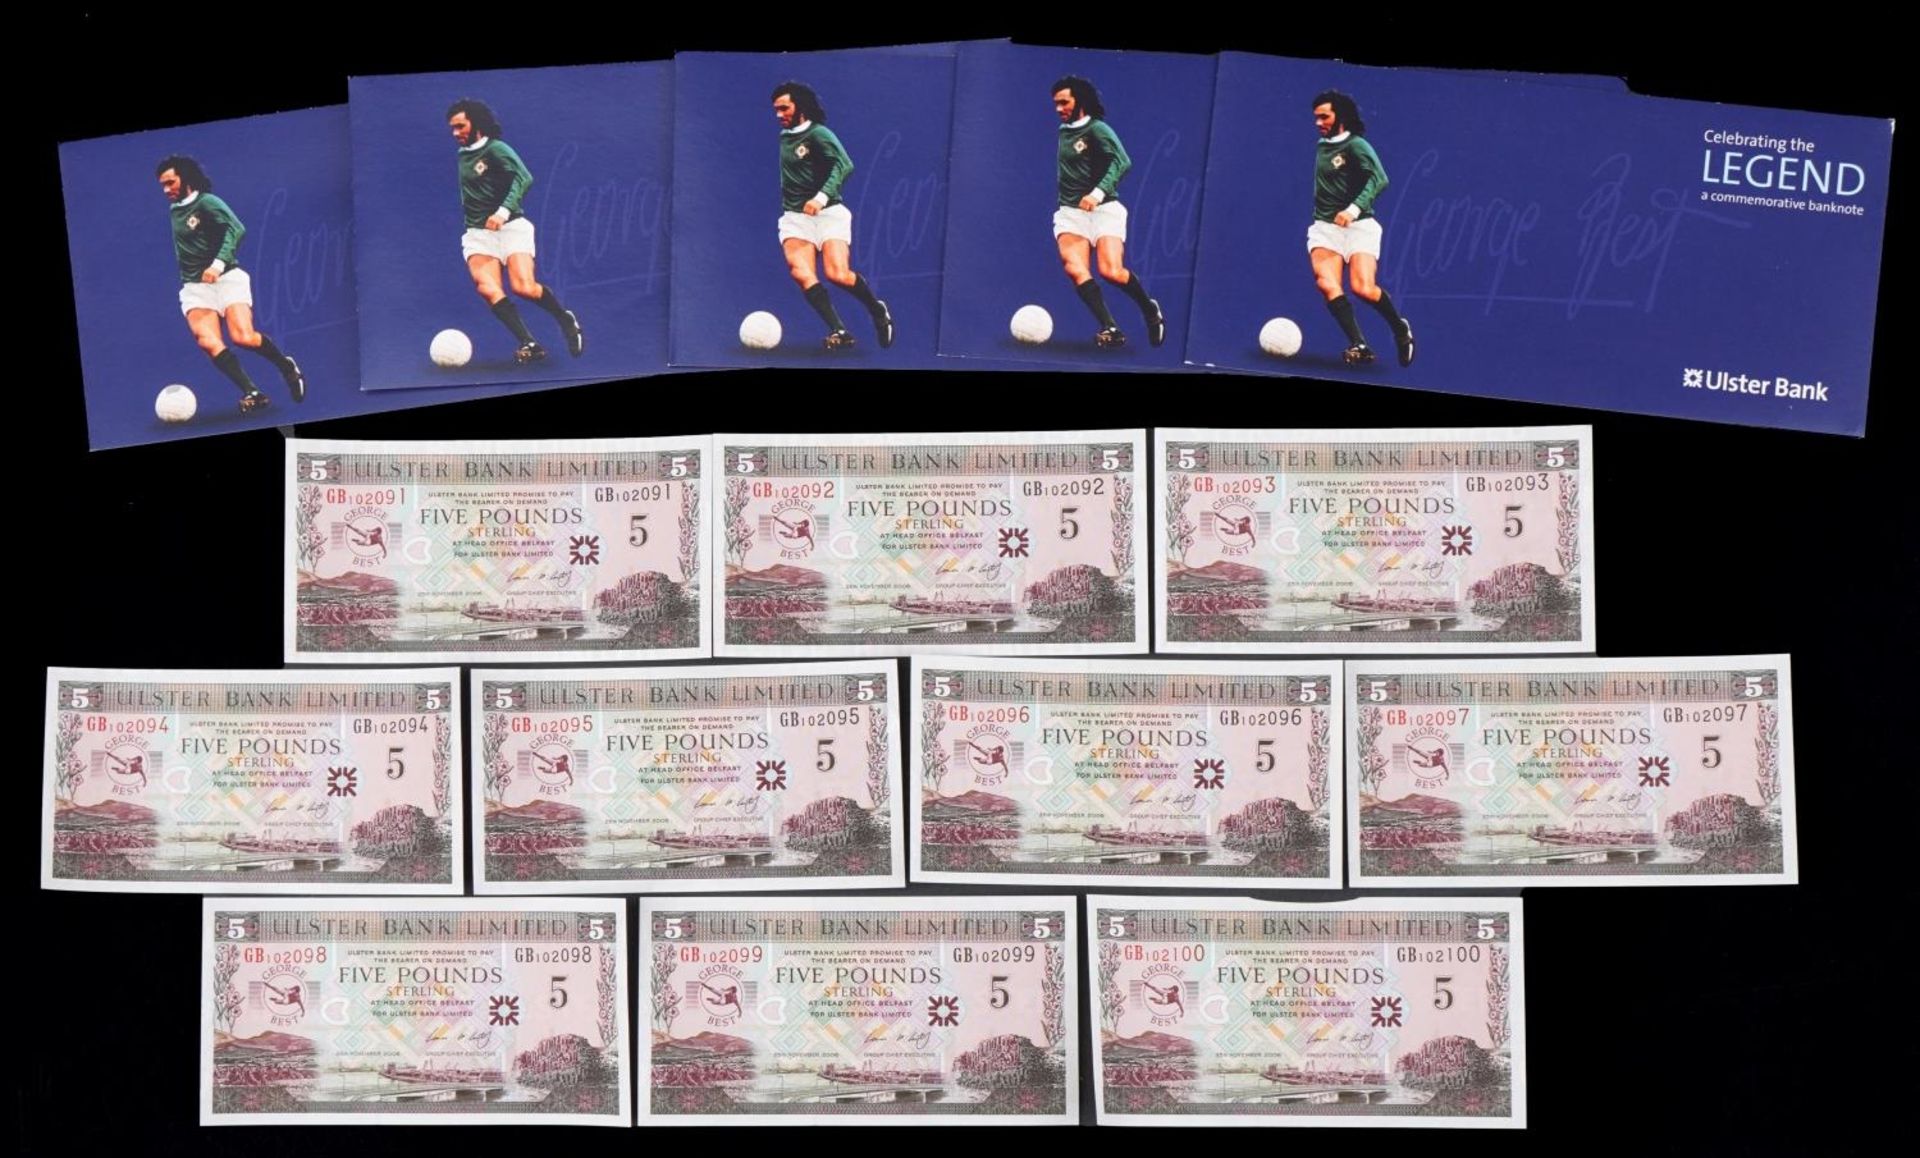 Ten count these 2006 Ulster Bank Limited George Best design five pound notes, including three with